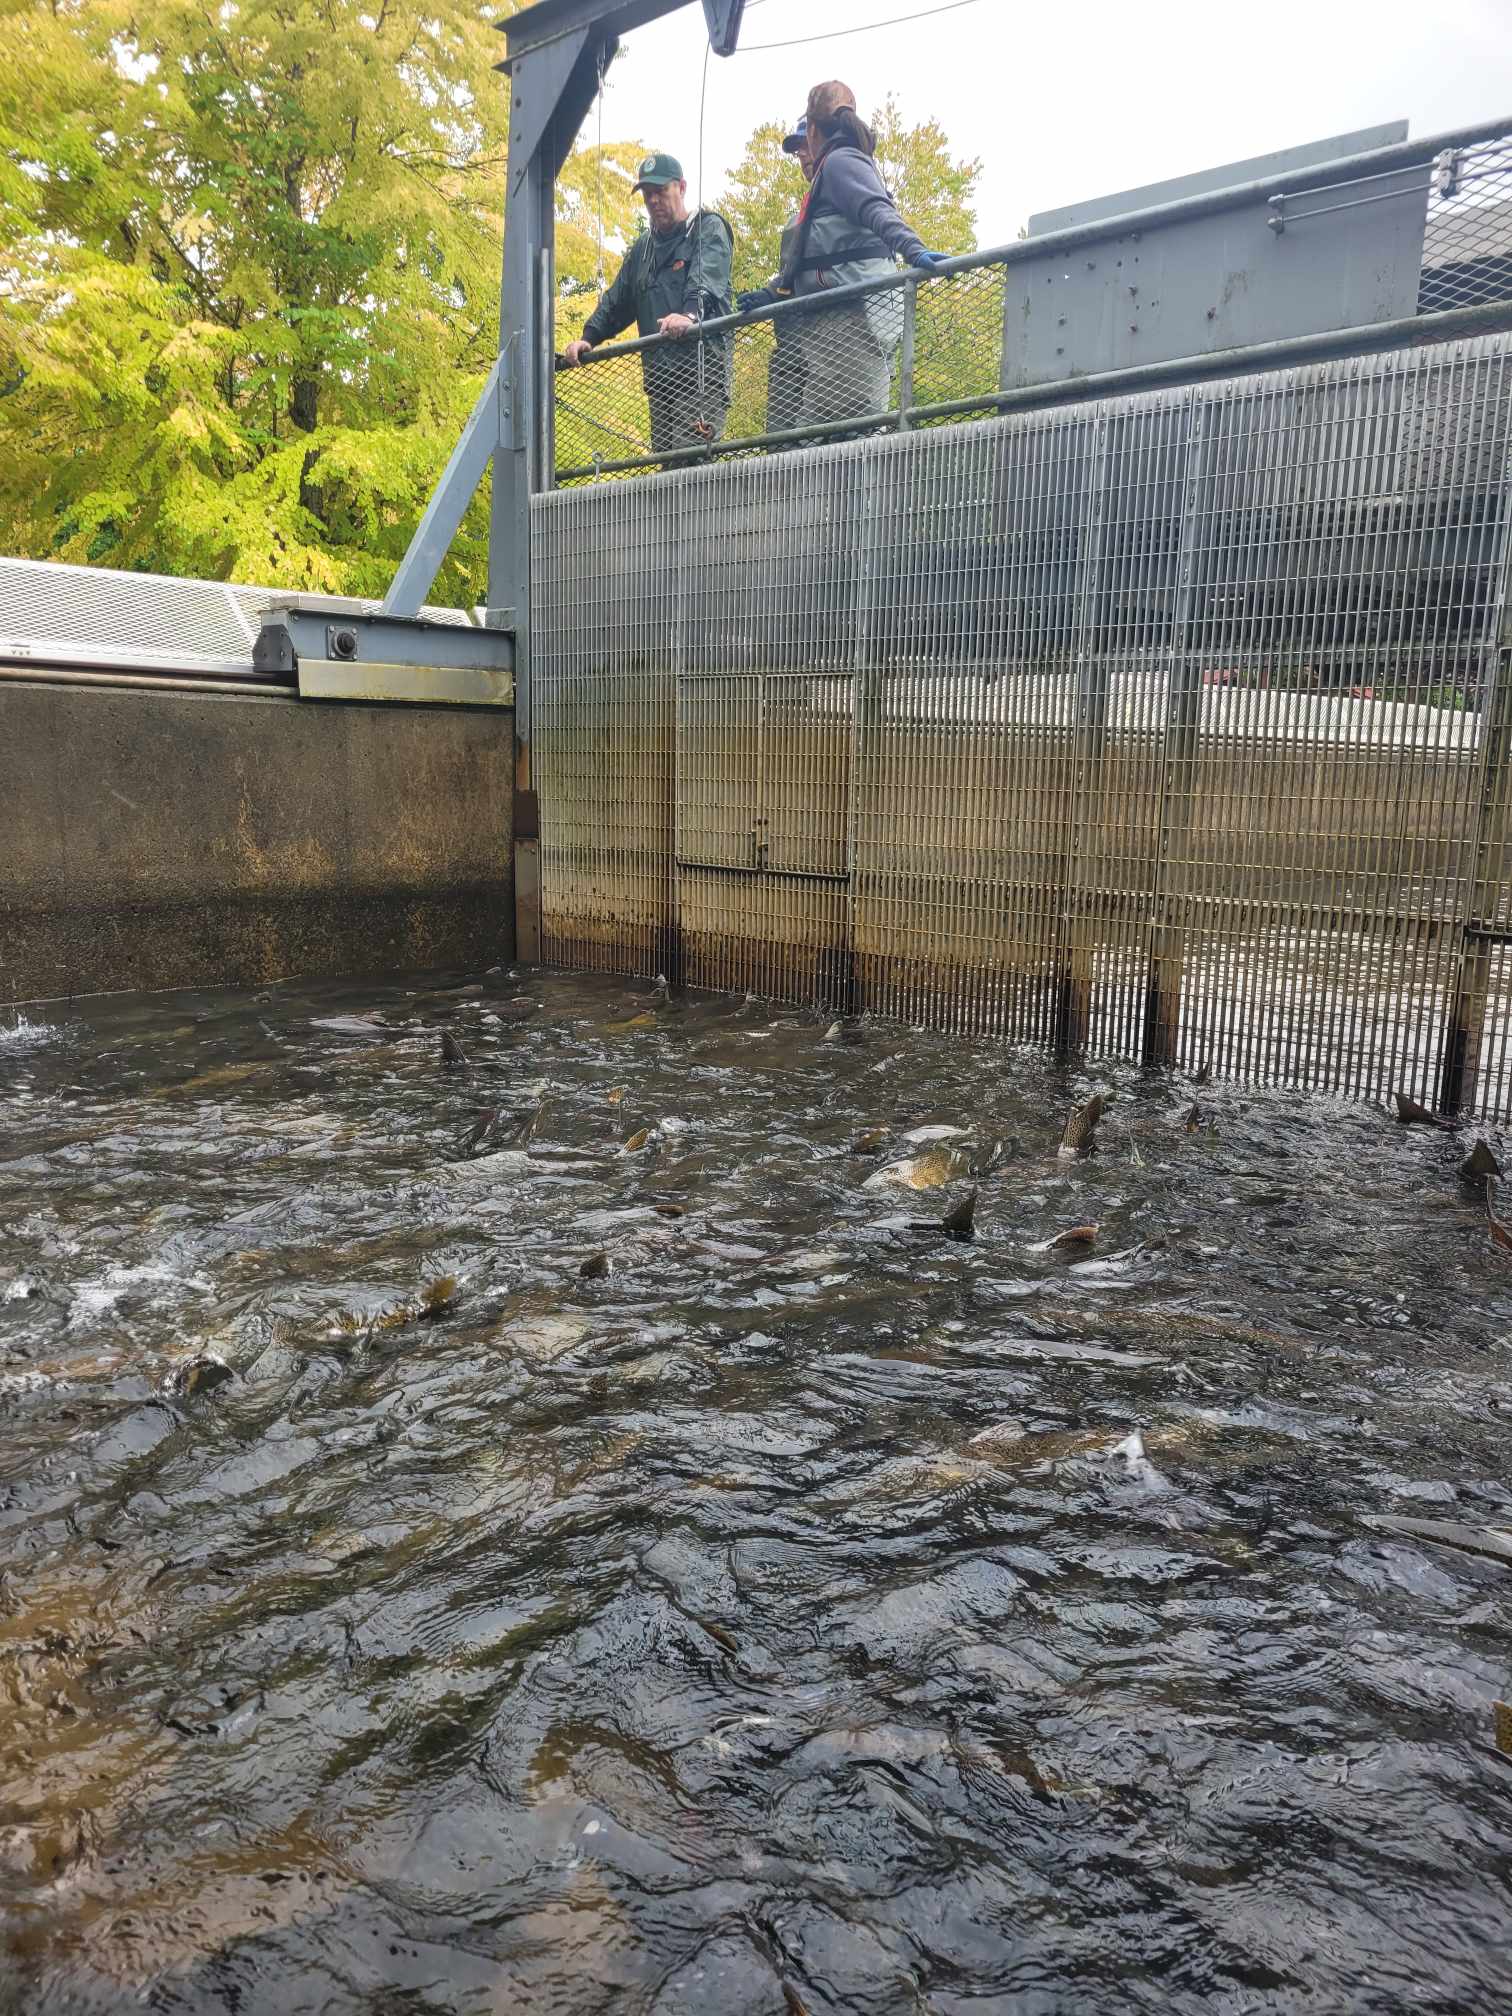 The Issaquah Hatchery fish ladder is now open and Chinnock are making their way up and into the spawning ponds. The salmon can be seen up close through the viewing windows.